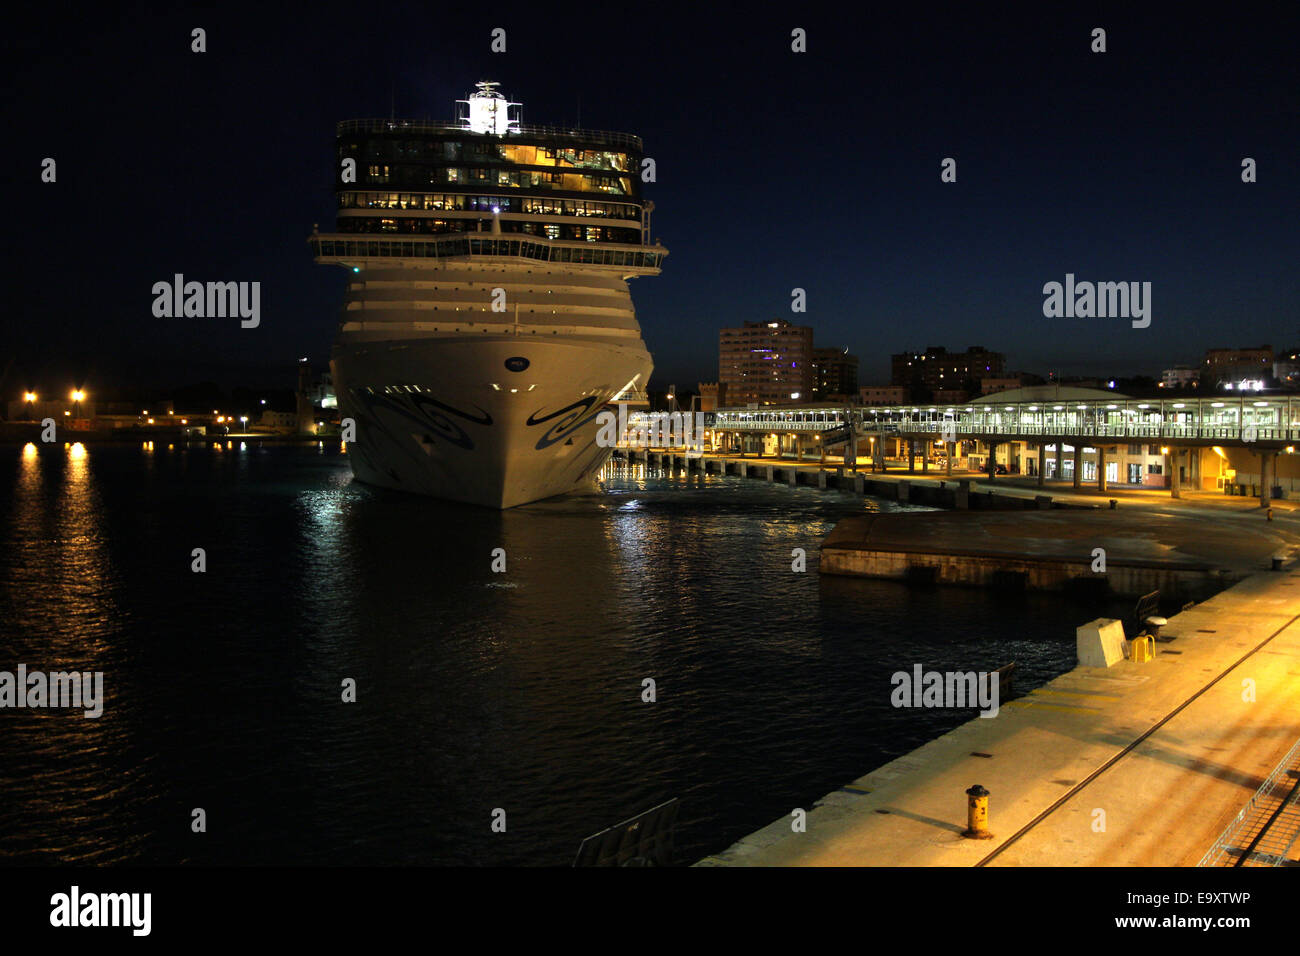 Norwegian Cruise Line (NCL) Cruise ship “NORWEGIAN EPIC” (325 mtrs)  - slipping away from quay at dusk  - Port of Palma Stock Photo